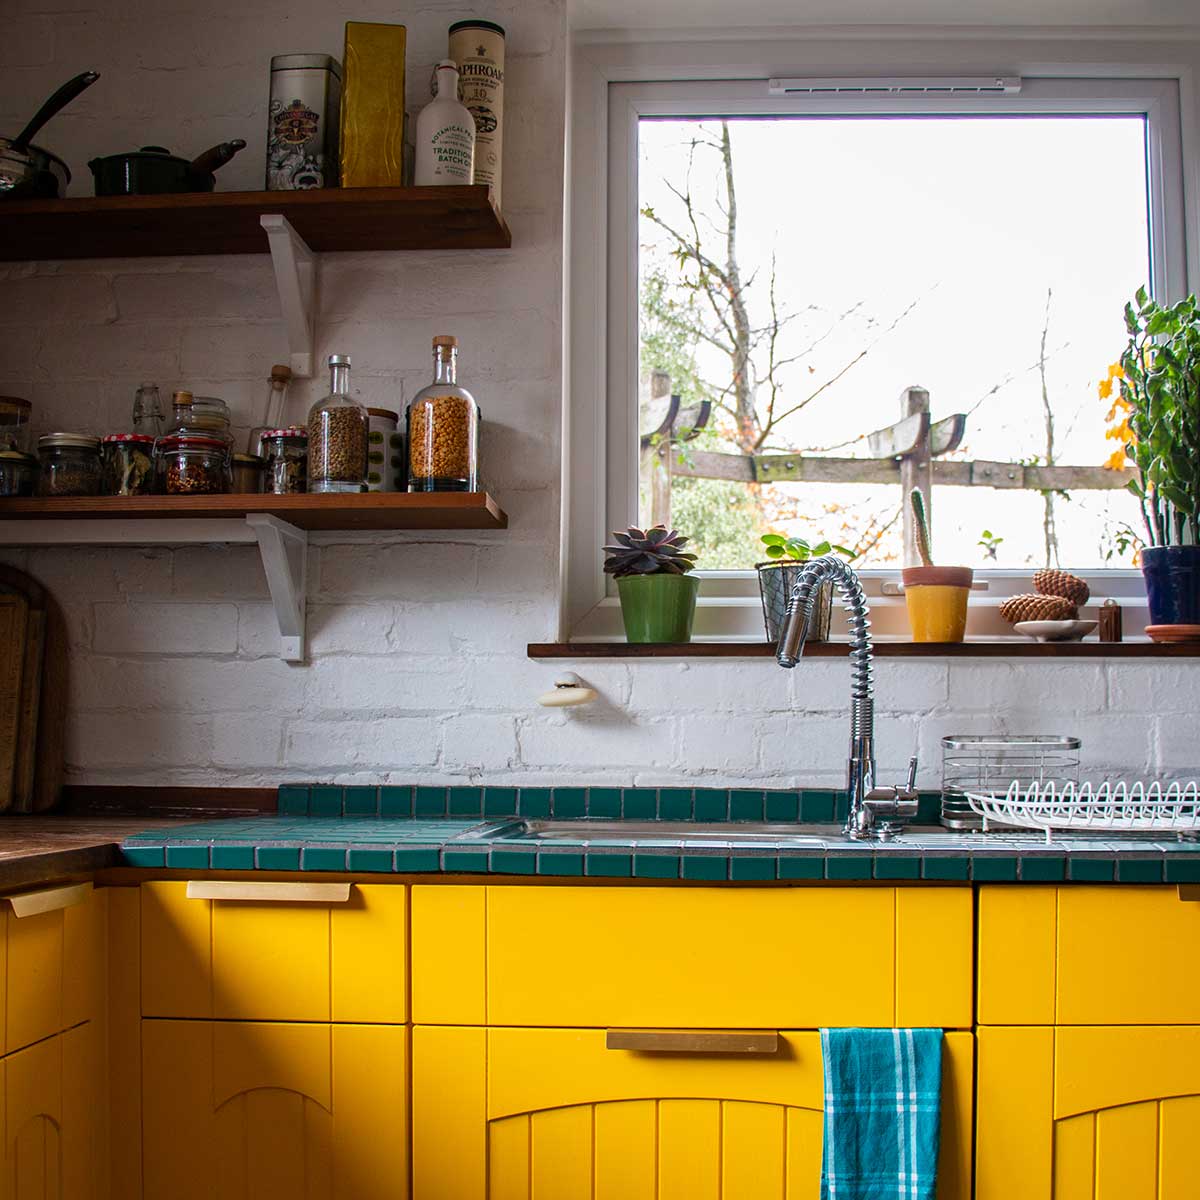 Photo of interior designed kitchen with bright yellow cupboard doors